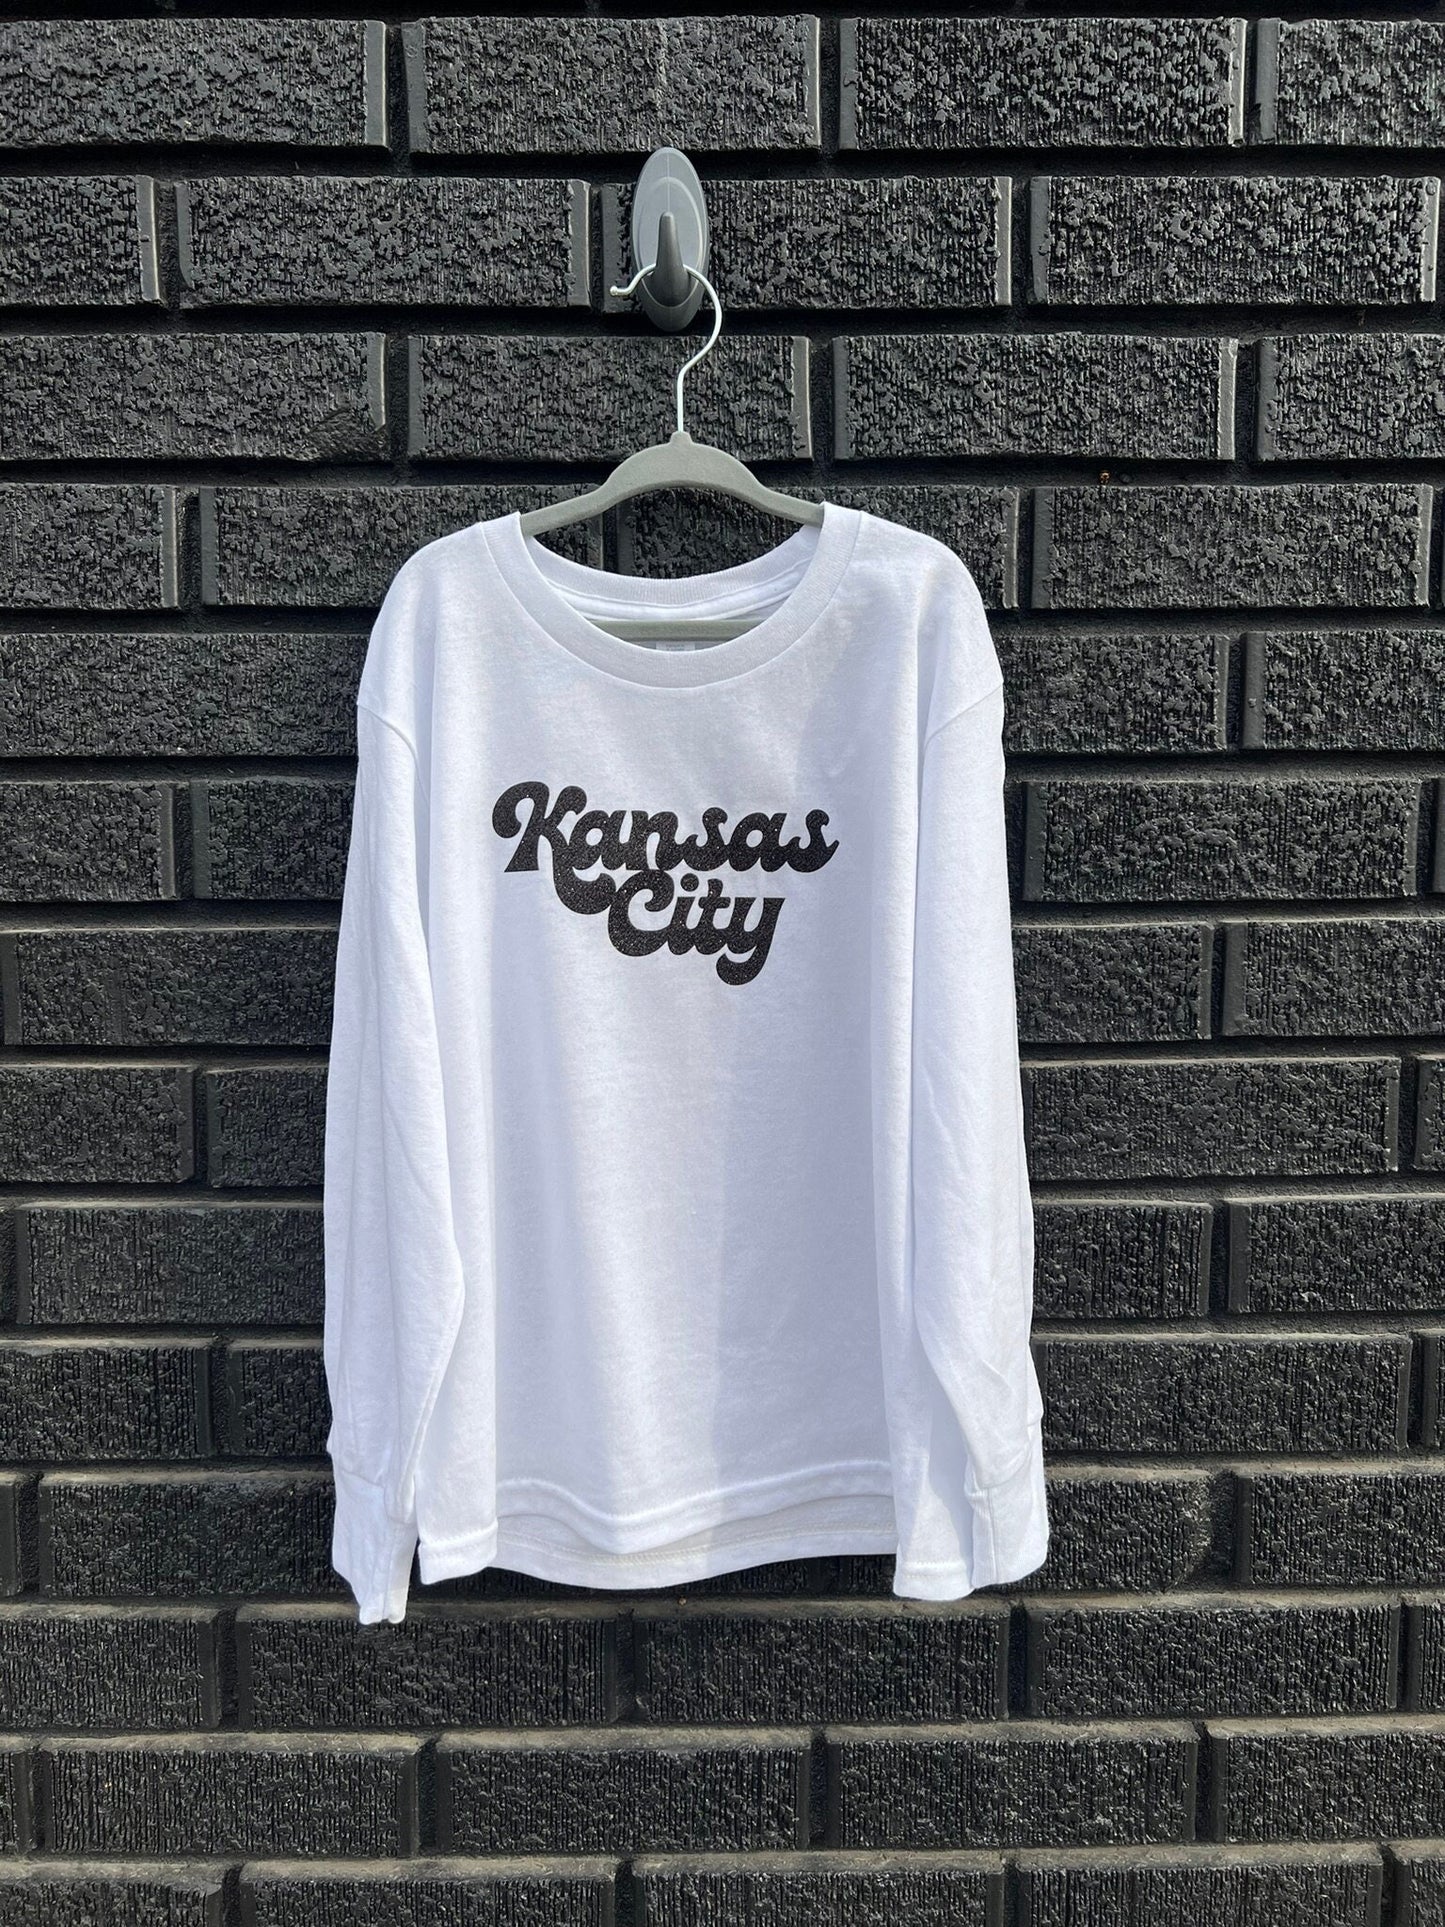 MADE IN KC Toddler Infant Retro Kansas City White Long & Short Sleeve T-Shirt | Perfect for Game Day! | Super Soft!